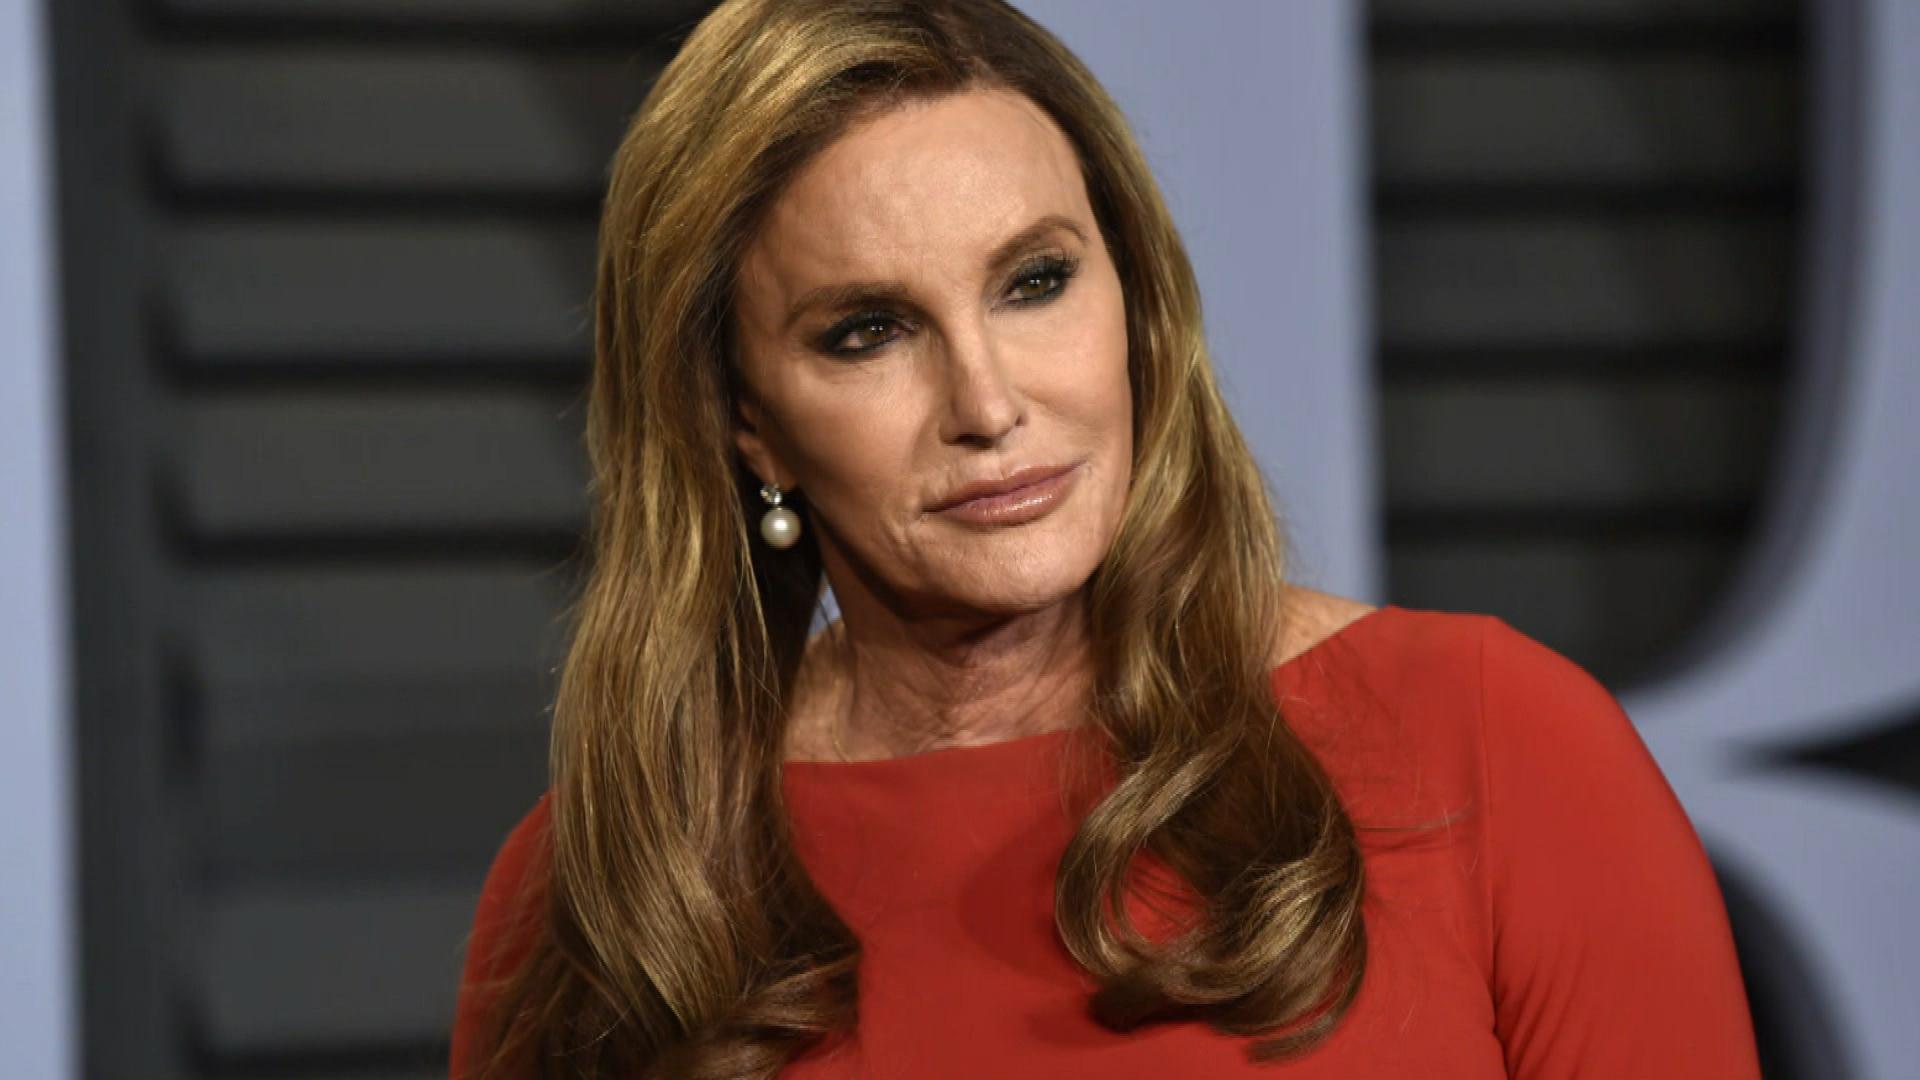 Caitlyn Jenner Wallpapers